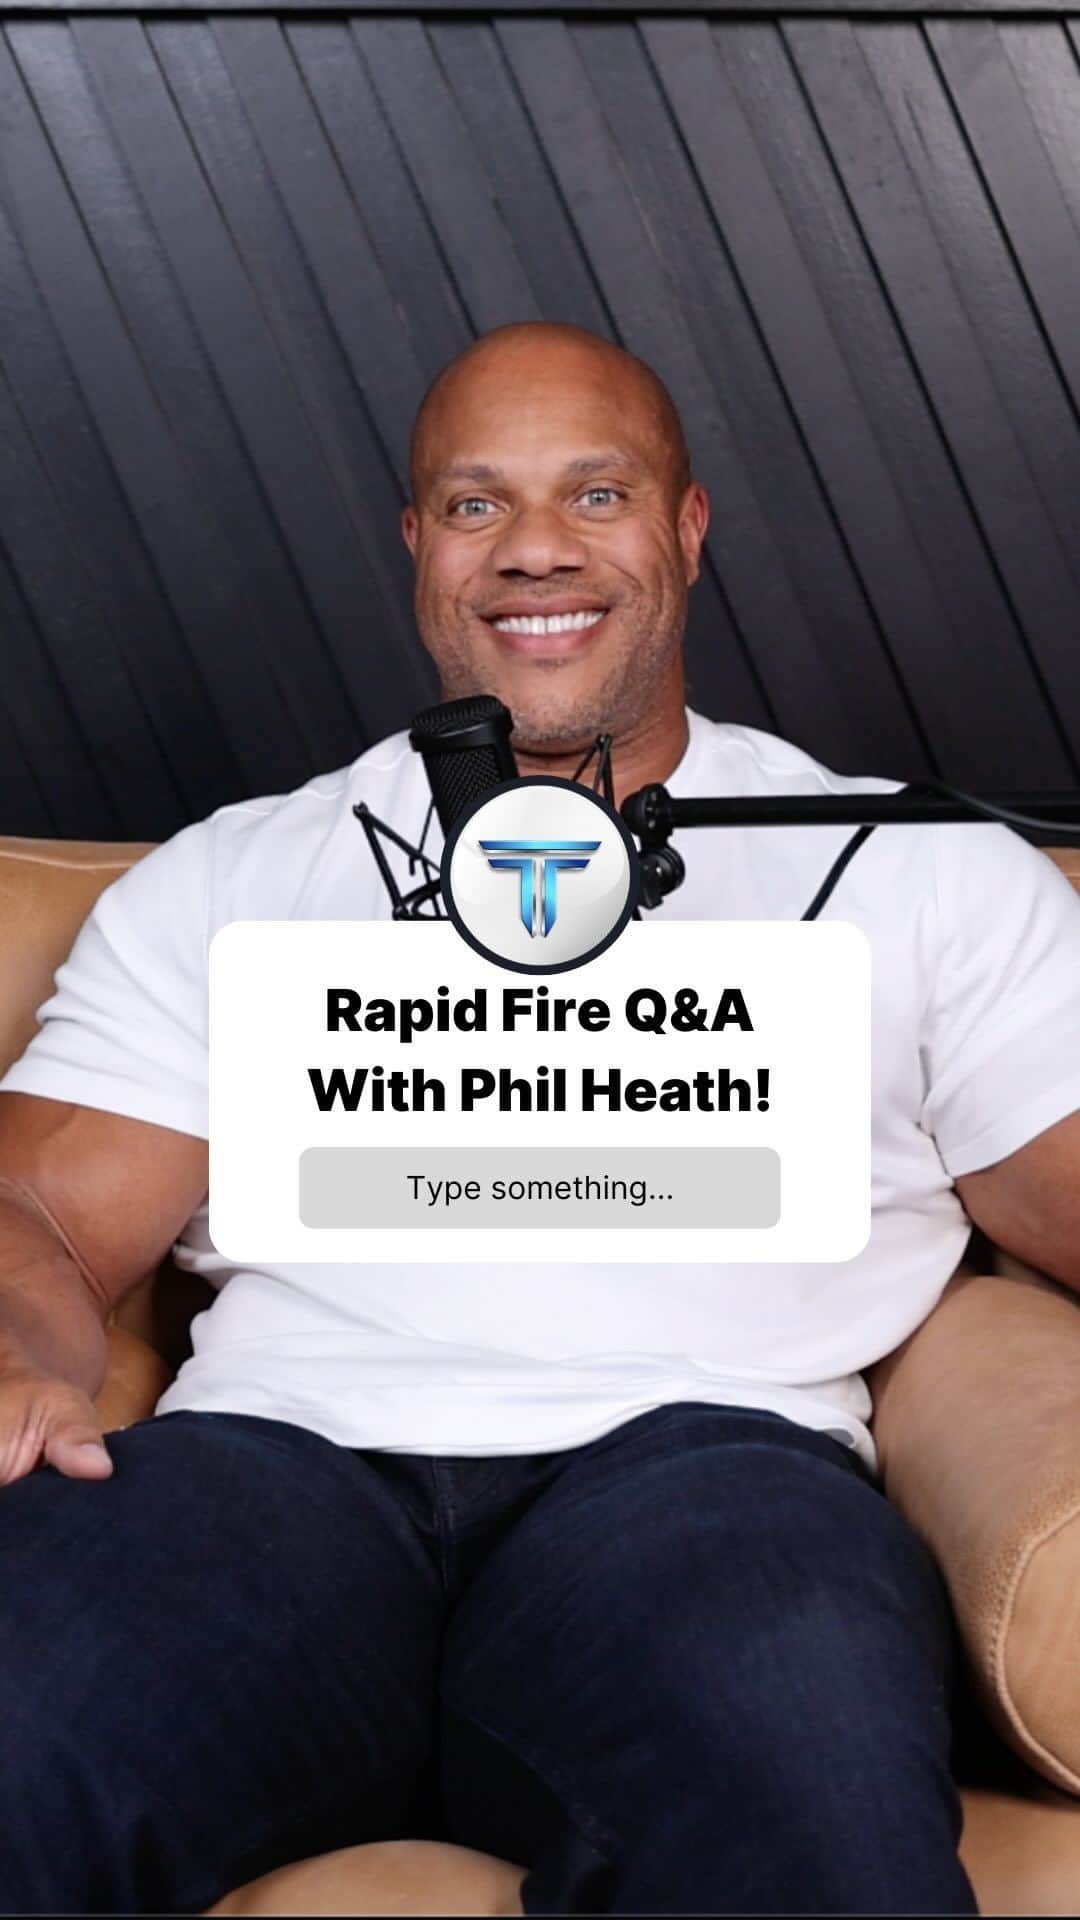 Phil Heathのインスタグラム：「What question would you like to ask Phil Heath?  🔗 Click The Link In our Bio  🗓️ Fill Out a Patient Intake Form⁣⁣ We’ll Help Find the Right Treatment Options!  🇺🇸 Veteran Owned & Operated⁣  Disclaimer: Any content posted on this Instagram account is for entertainment, educational and knowledge purposes only and is not intended as medical advice. We always recommend consulting with our team of licensed healthcare providers before making any changes to your wellness or medical routine. Our content is intended to promote wellness and healthy approaches to lifestyle choices. By viewing and engaging with our Instagram content, you agree to this disclaimer.  #fitnessjourney #fitnesslifestyle #fitnessgoals #fitnessinspiration #fitnessaddicted #fitnesstips #fitnessgoal #transcend #wellnessfriday #wellnessjourney #fridaymotivation #wellnessfitness #philheath #mrolympia #thegift #7xmrolympia #wellnesslife #hrt #hormonereplacementtherapy #hormonetherapy #fitnesscommunity #peptidetherapy #transcendhrt #transcendcompany #weightloss #weightlosstransformation #weightlossgoals」